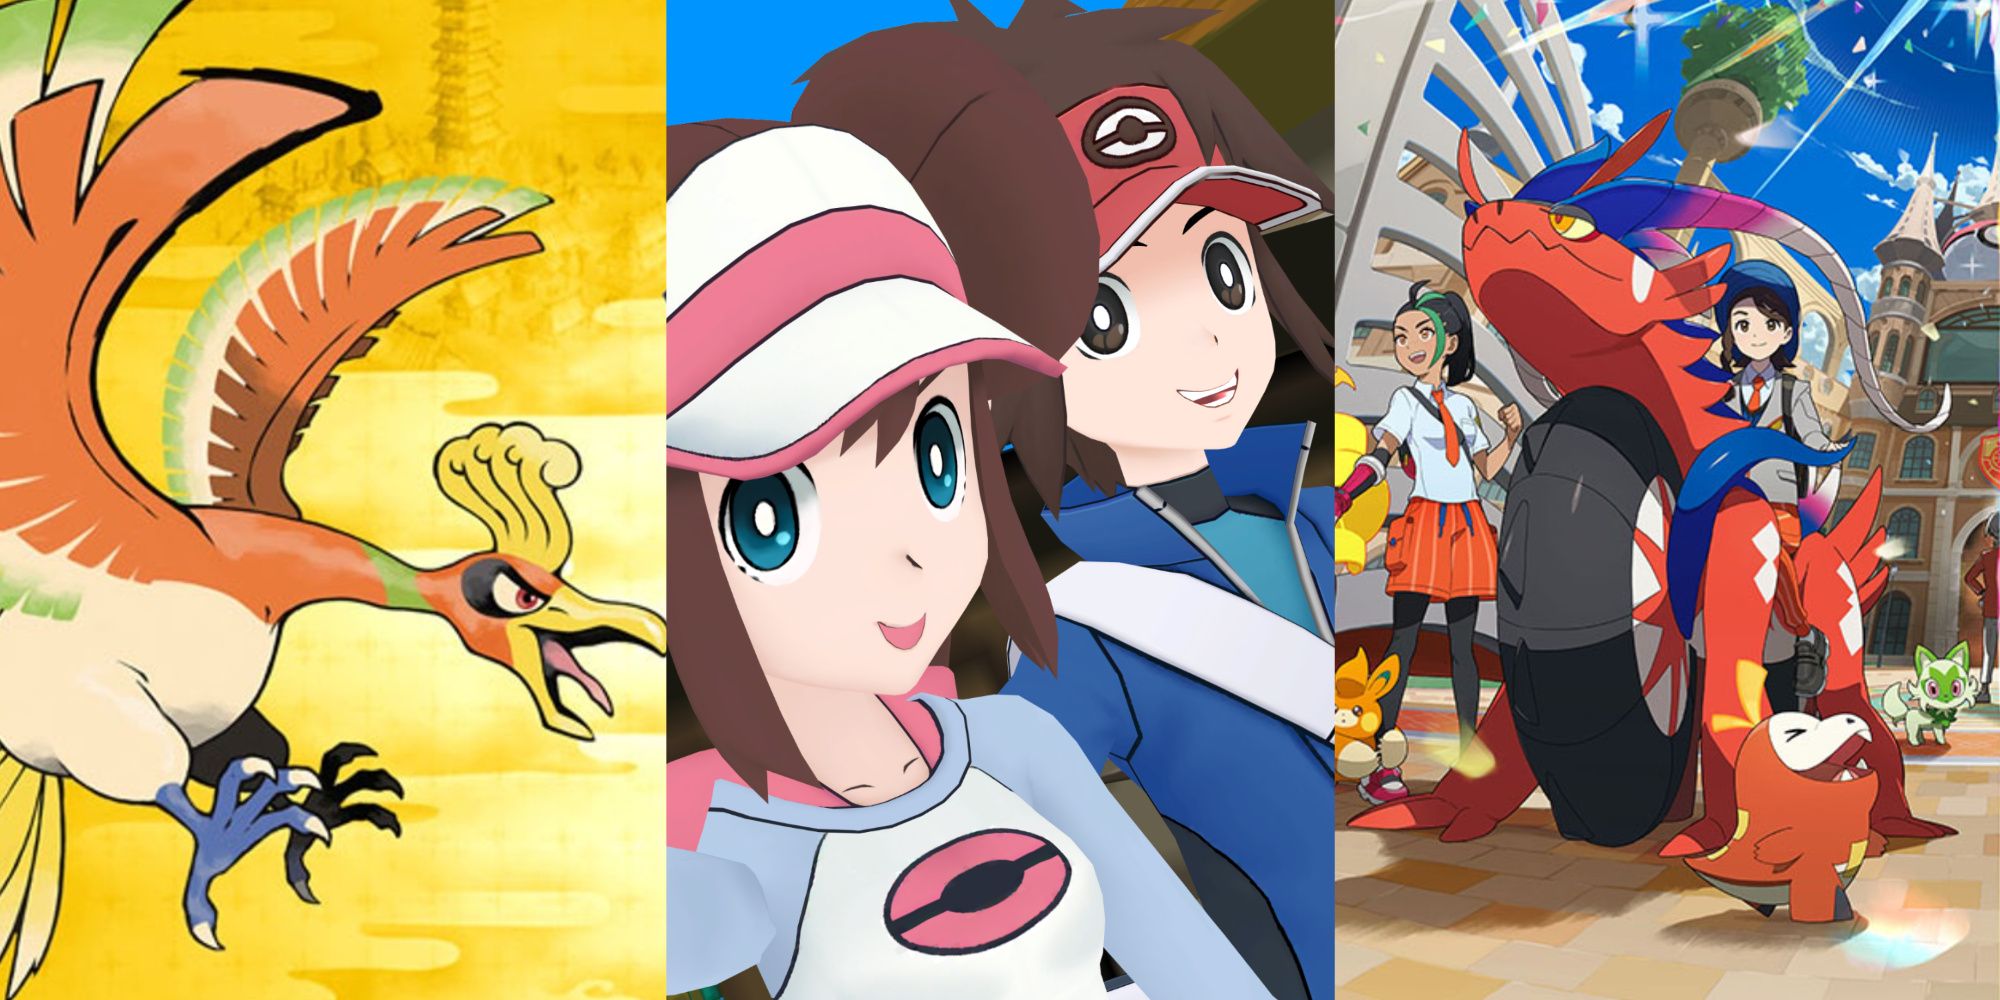 A collage showing the legendary Pokemon of Pokemon HeatGold, the trainers of Pokemon Black 2, and the legendary Pokemon of Pokemon Scarlet and other characters around it.